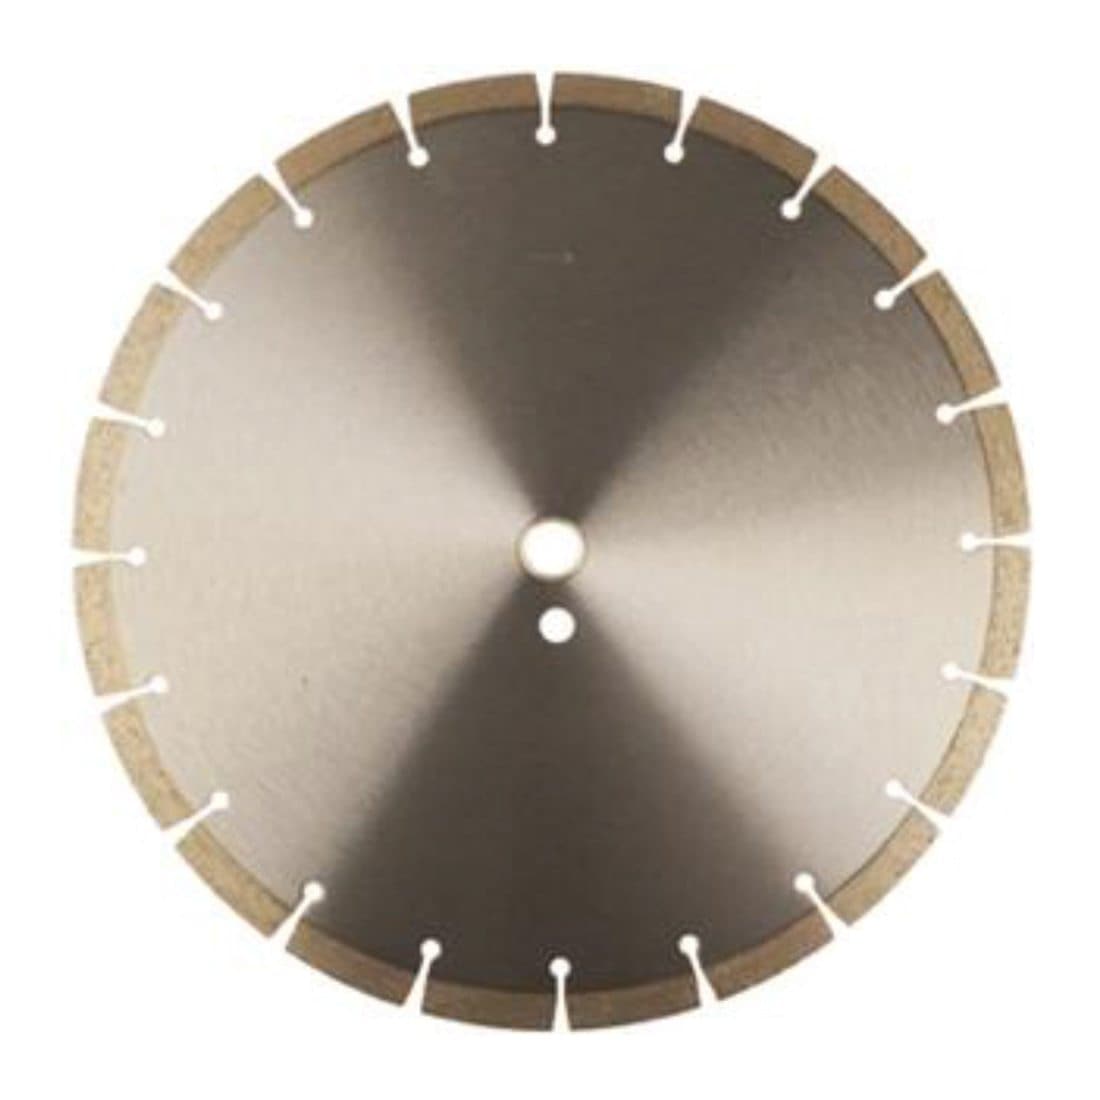 Sintered Saw Blade for Hard Material - Economy - Diamond Tool Store